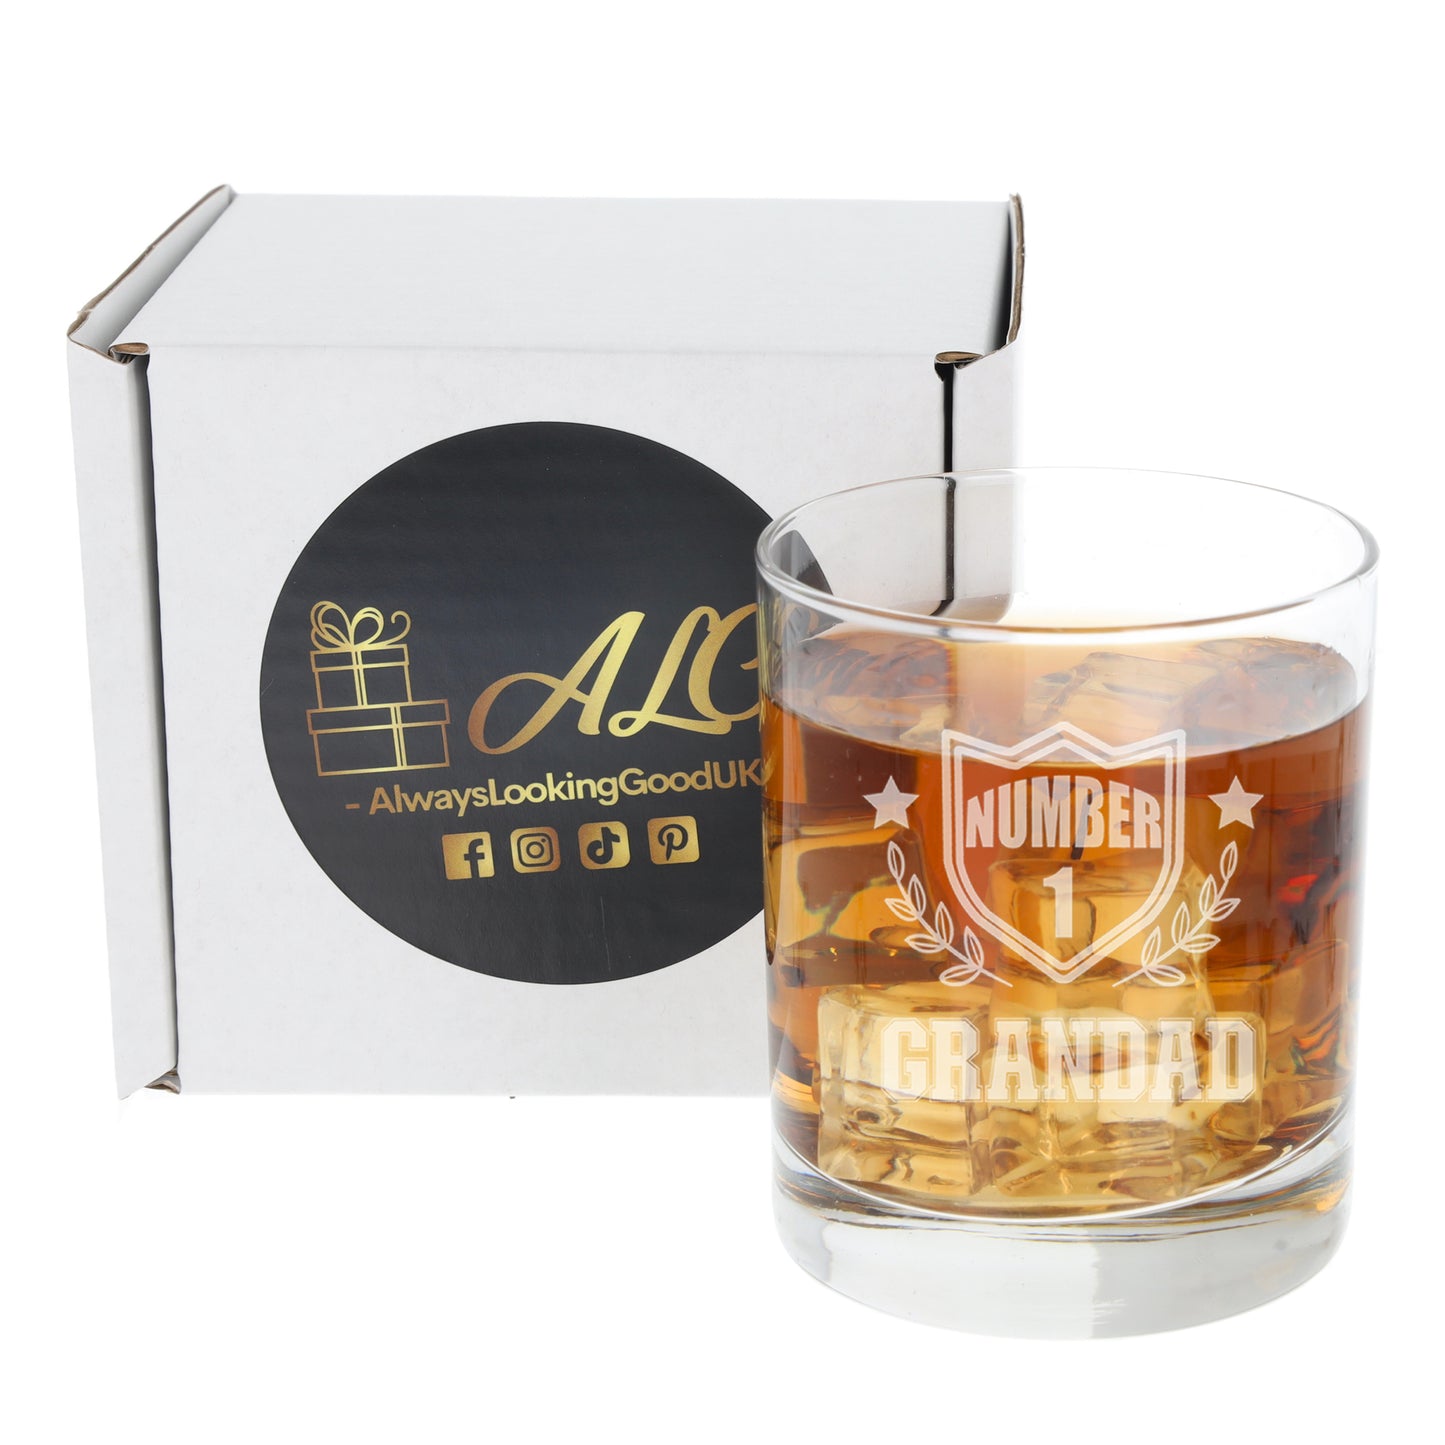 Engraved "Number 1 Grandad" Whisky Glass and/or Coaster Set  - Always Looking Good -   